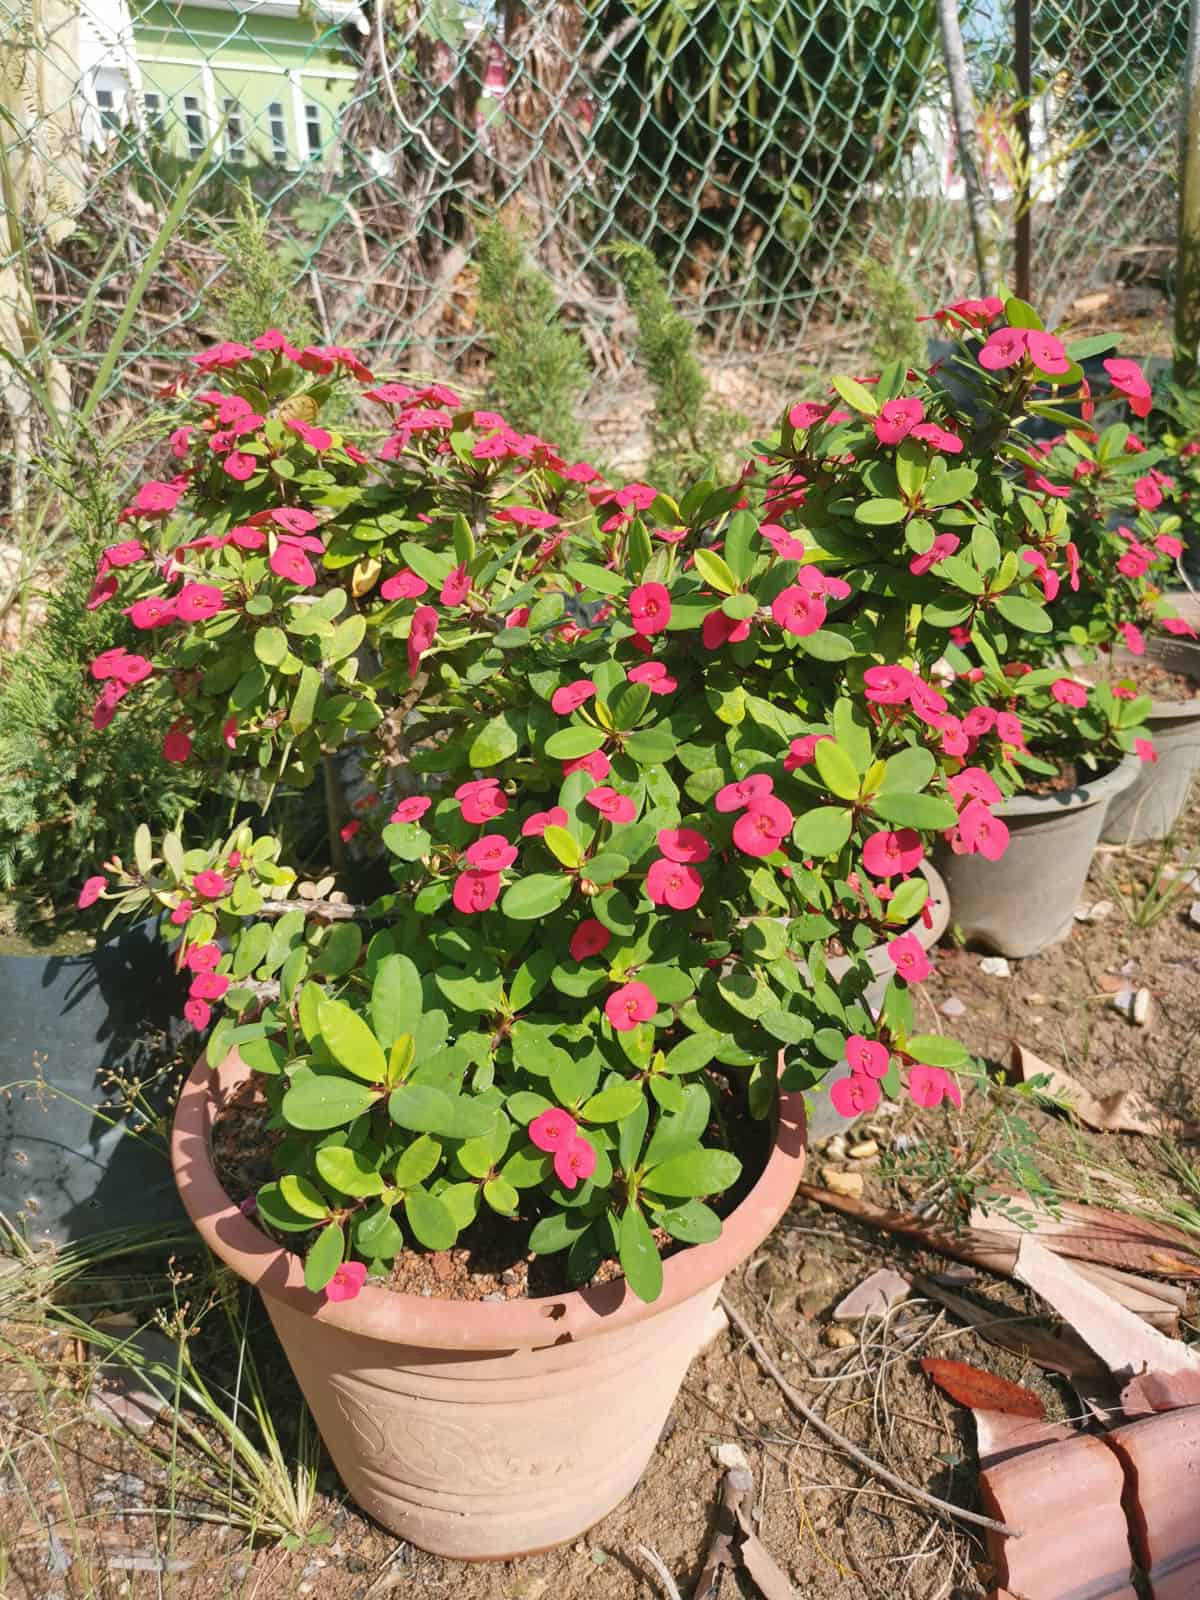 Pots of bright pink blooming Pink Crown Of Thorns